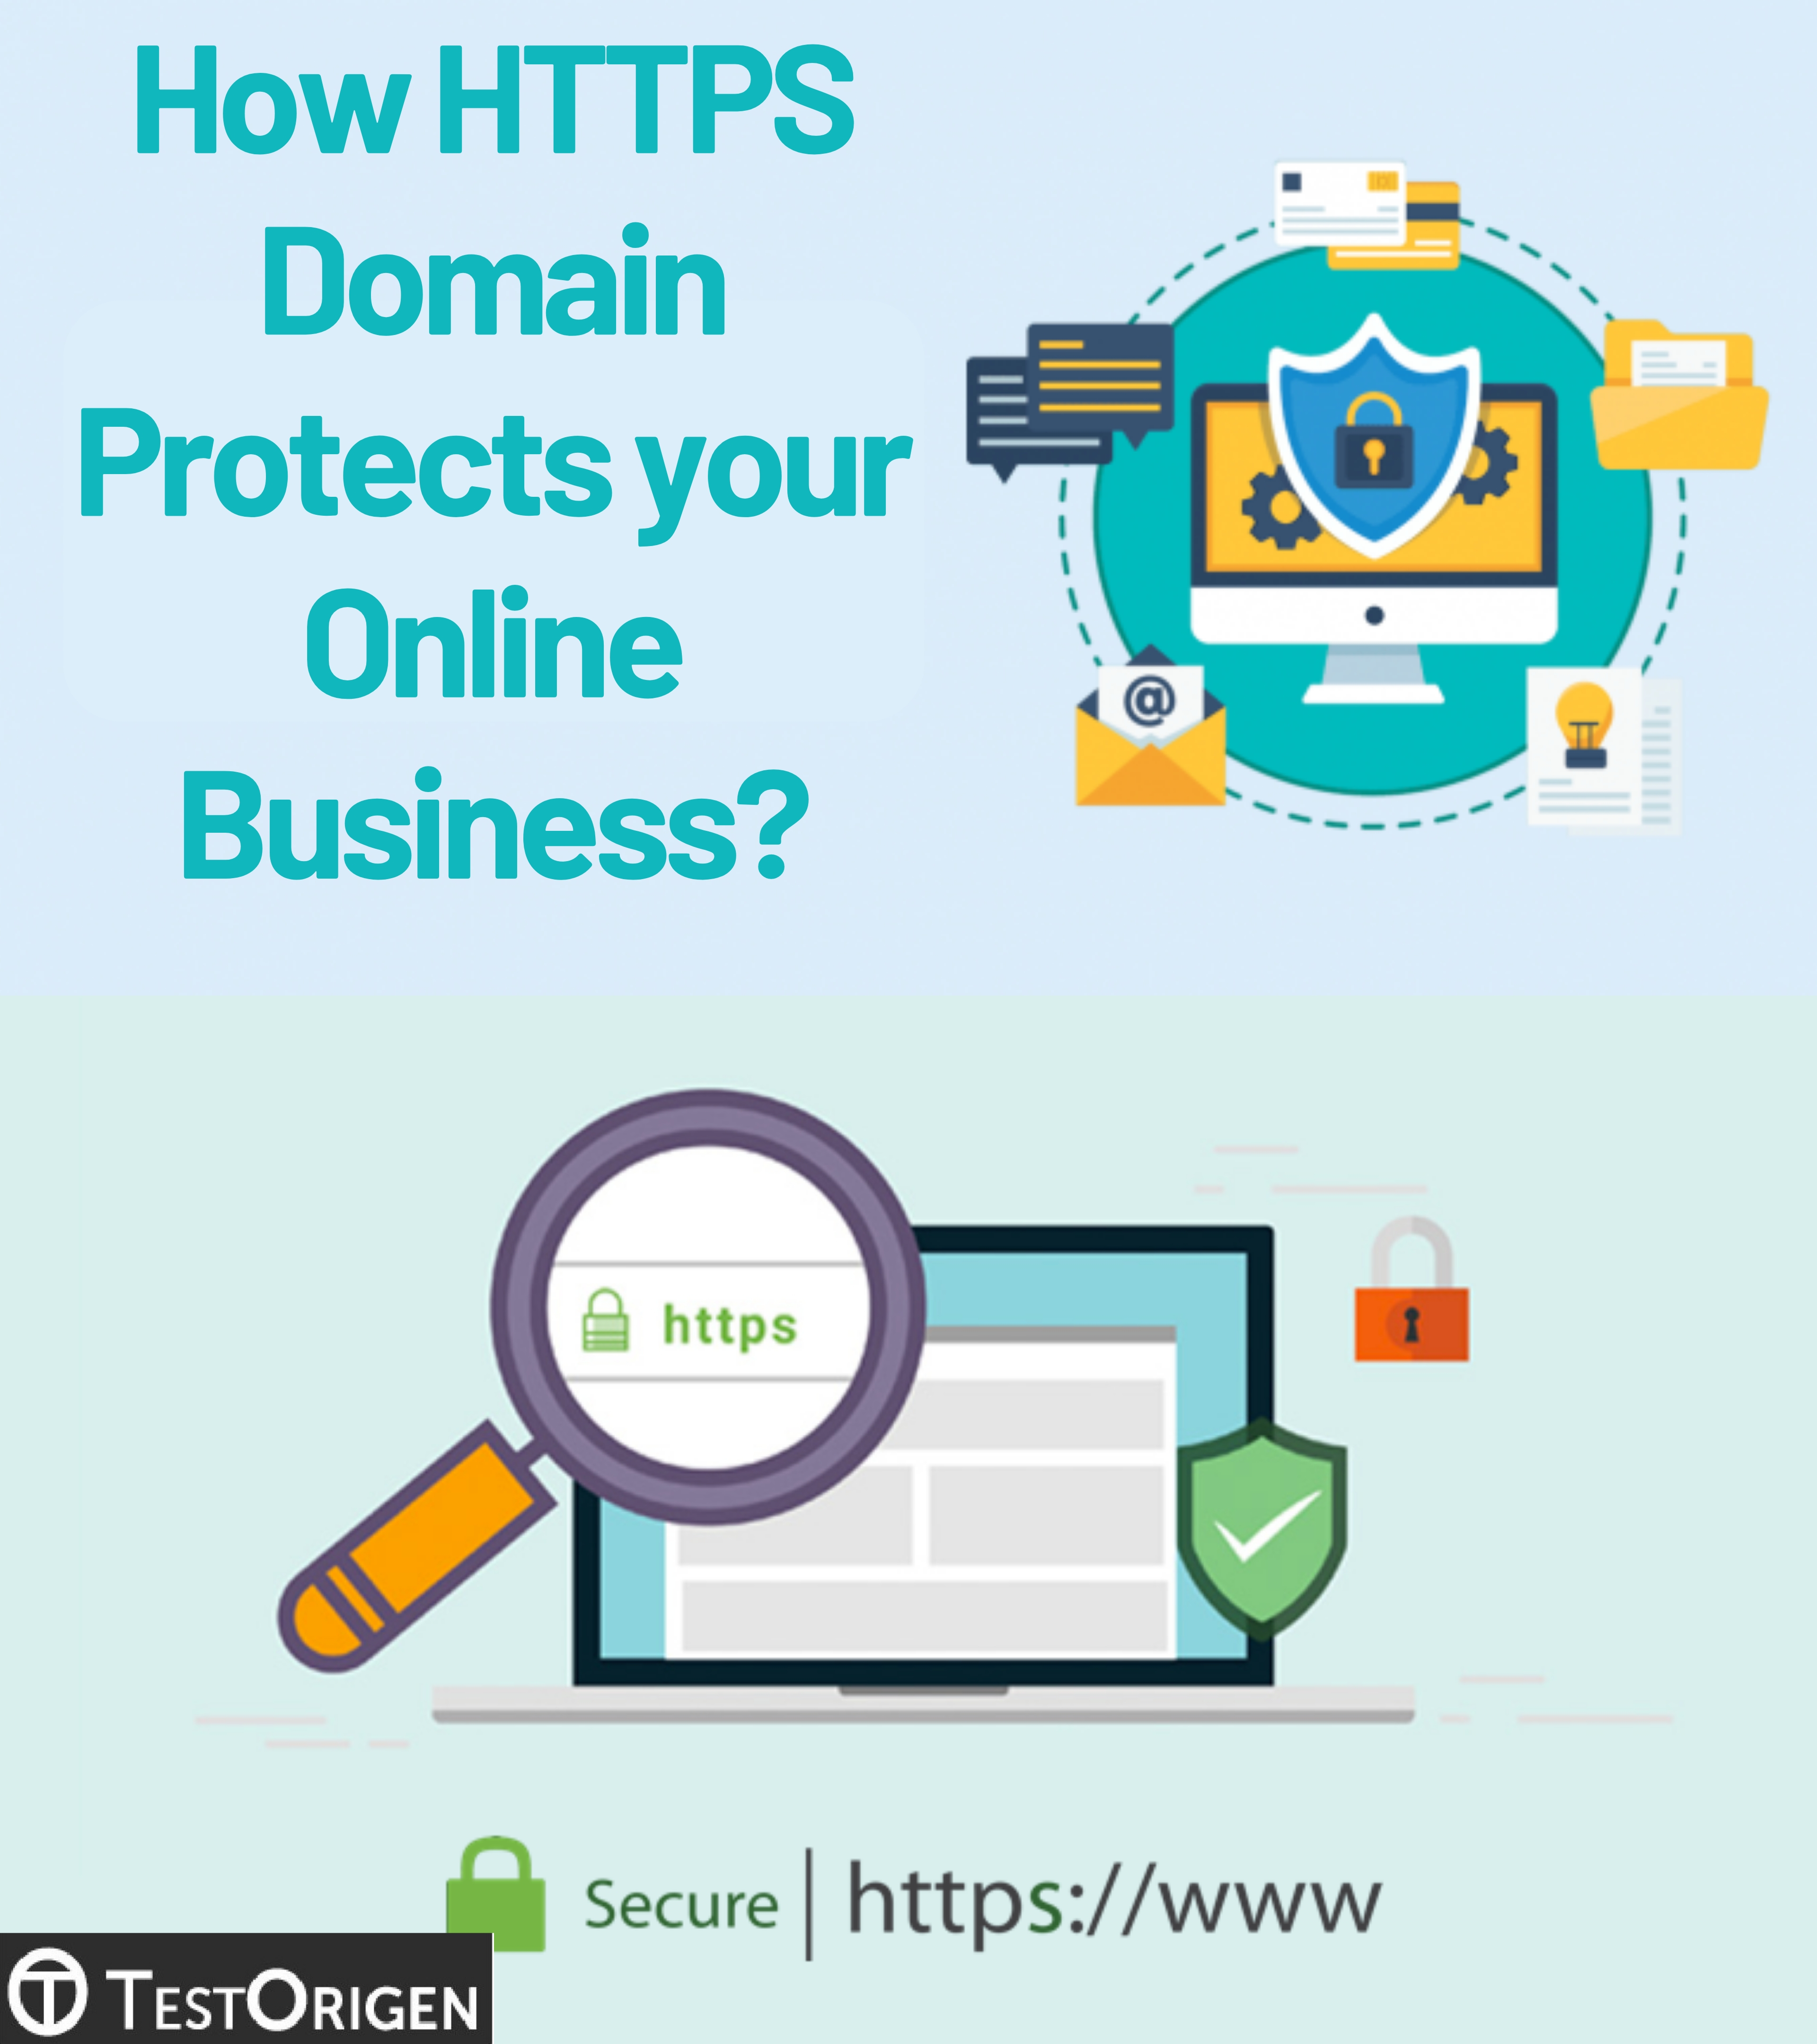 How HTTPS Domain Protects your Online Business?